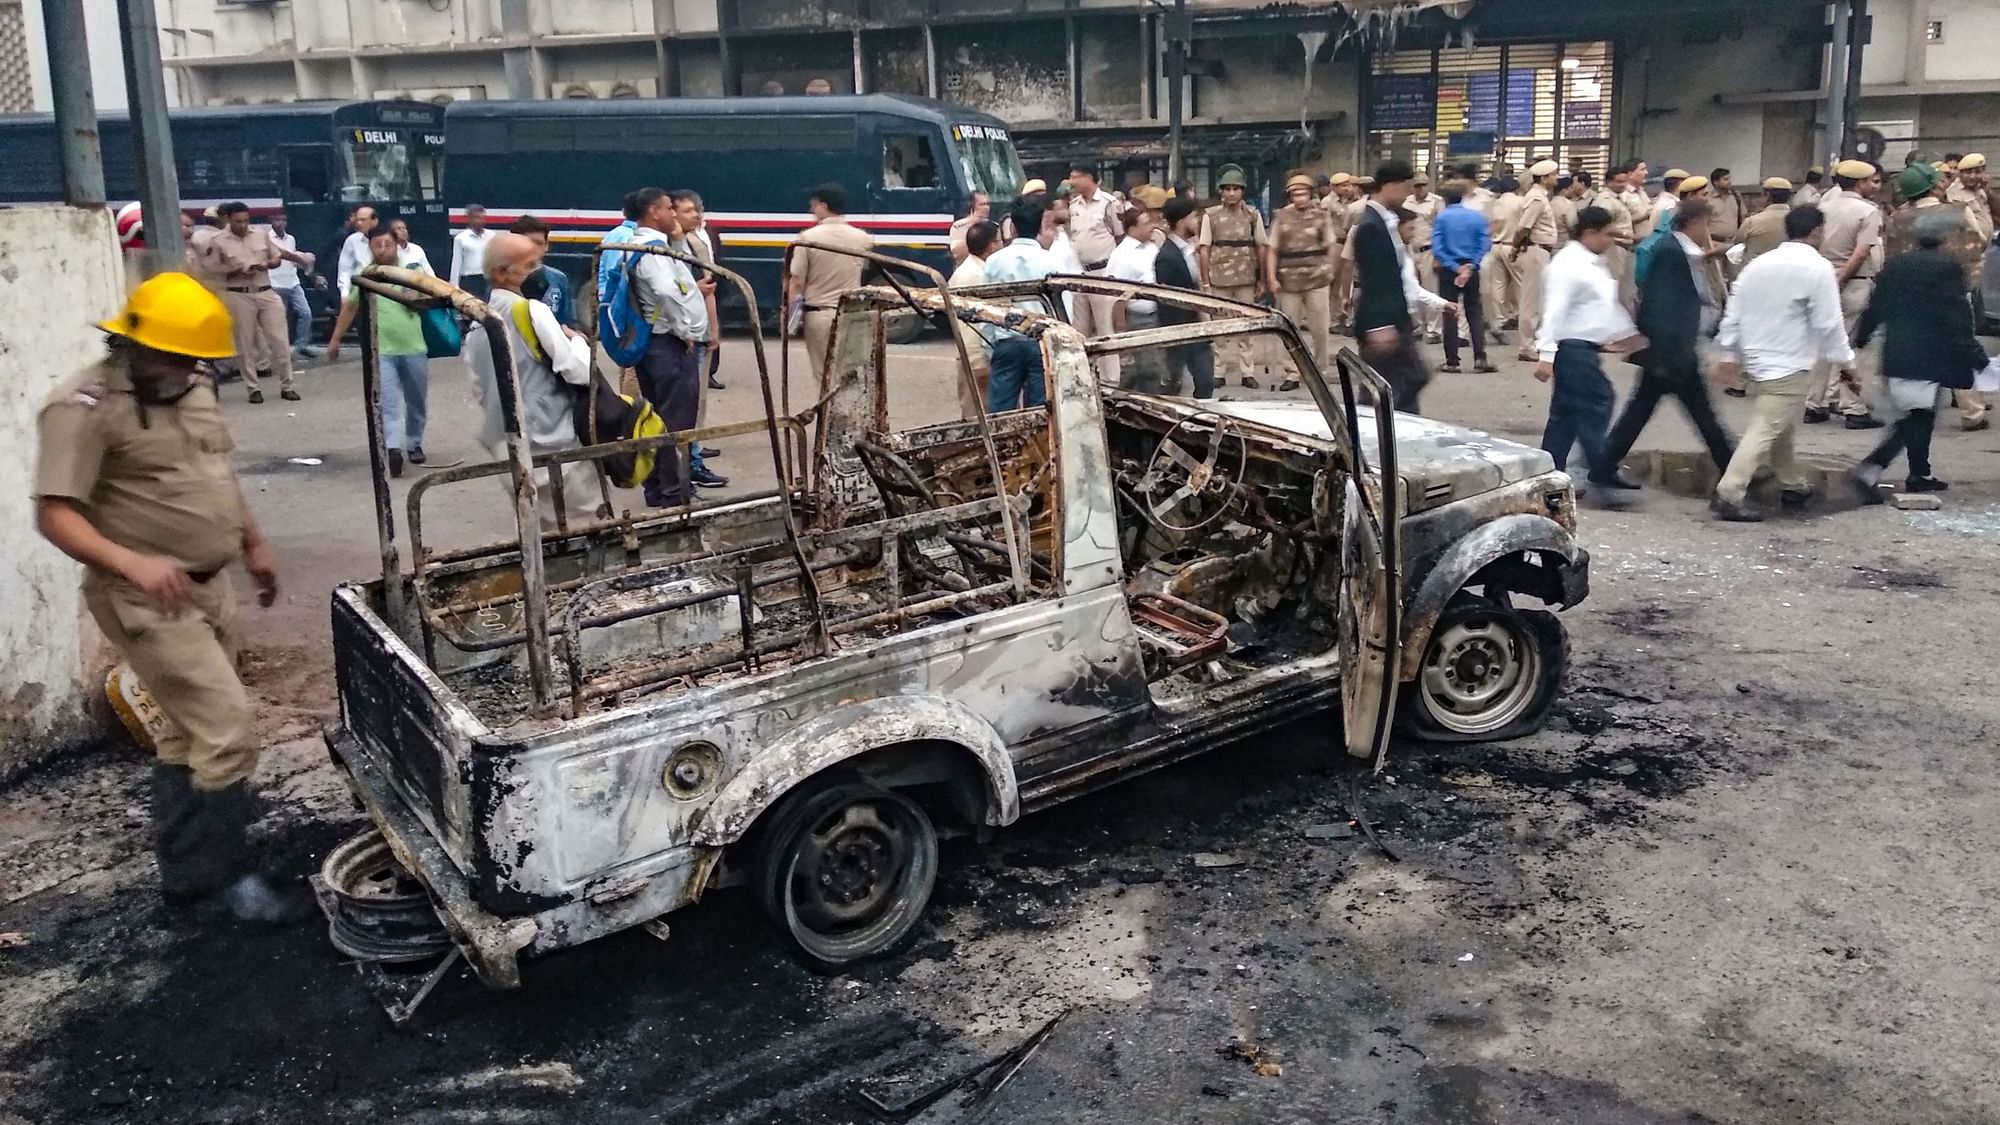  A police vehicle after it was burnt during clashes between lawyers and police personnel at Tis Hazari Court complex on Saturday, 2 November.